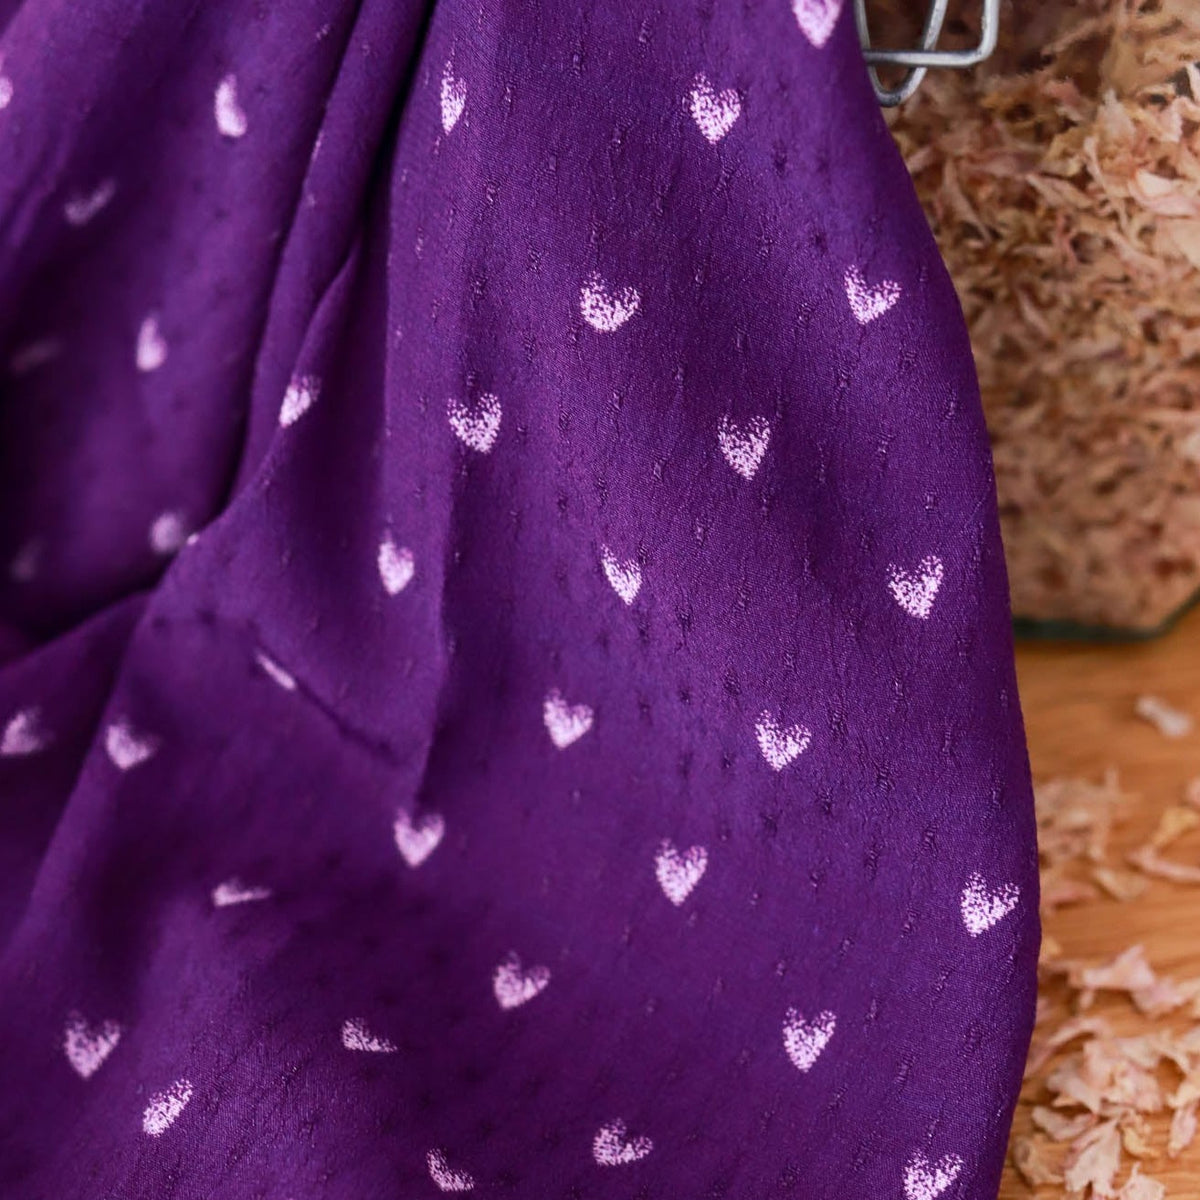 Lise Tailor Dotted Viscose Crepe Fabric - Heart To Take - Priced per 0.5 metre